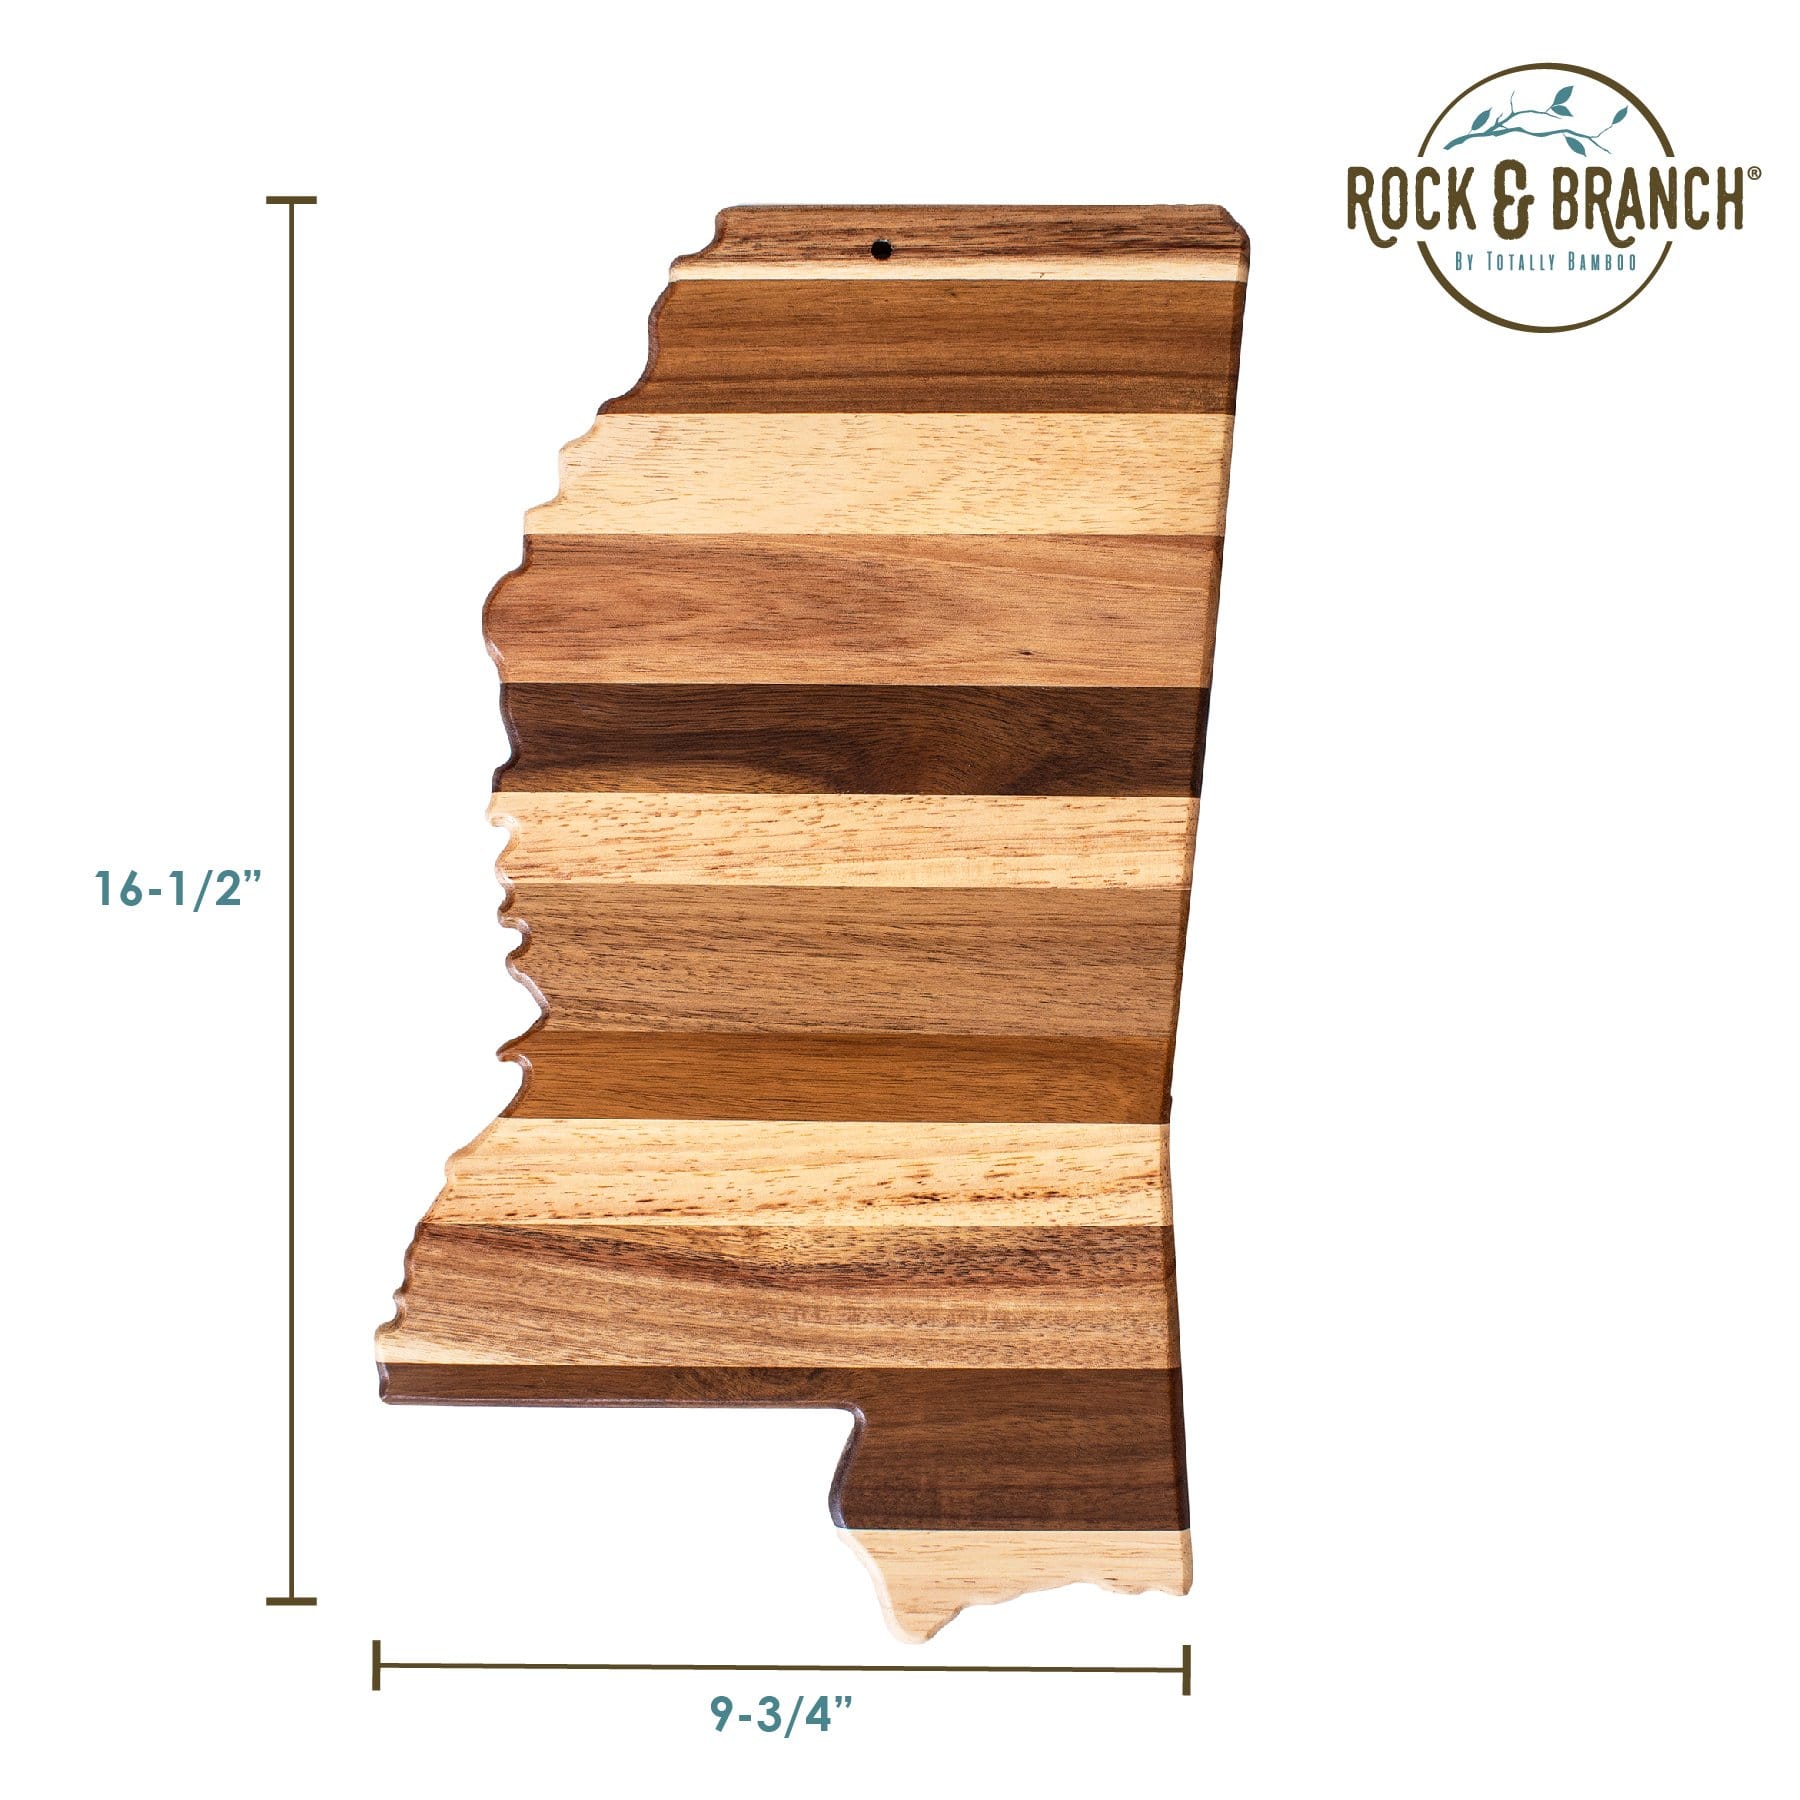 Totally Bamboo Rock & Branch® Shiplap Series Mississippi State Shaped Wood Serving and Cutting Board